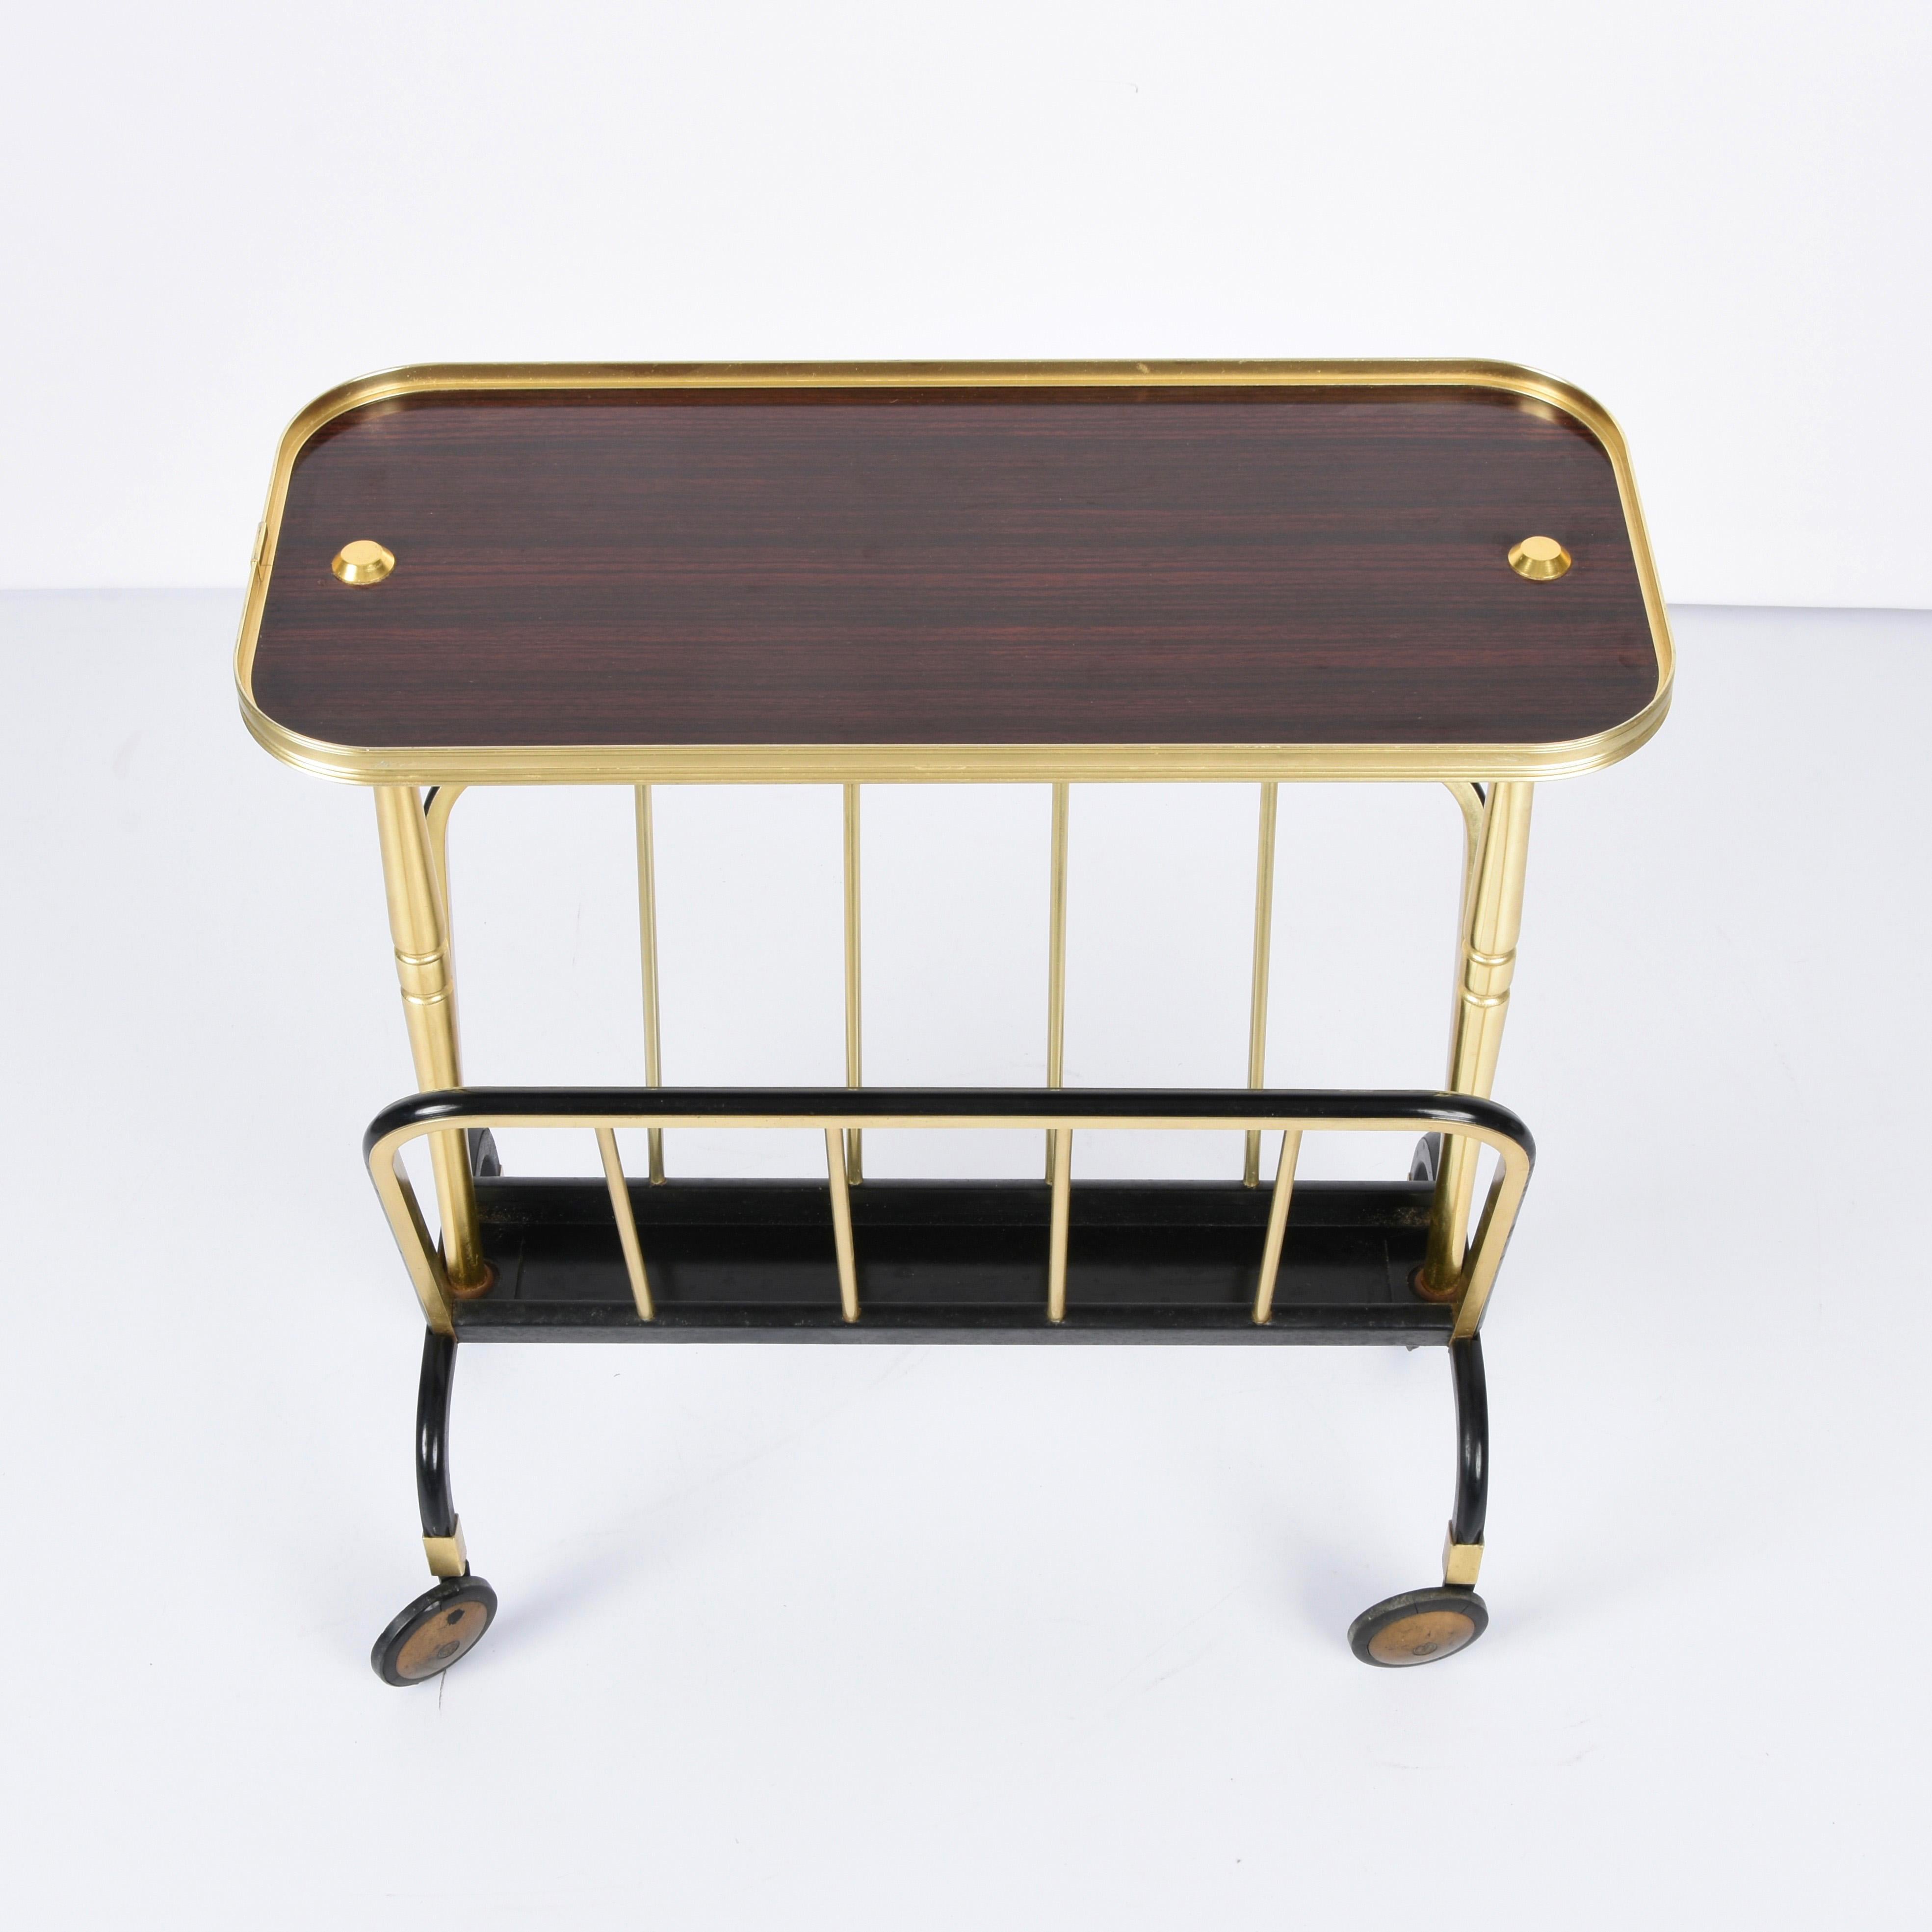 Ico Parisi Midcentury Aluminum and Formica Trolley Magazine Rack for MB, 1960s For Sale 4